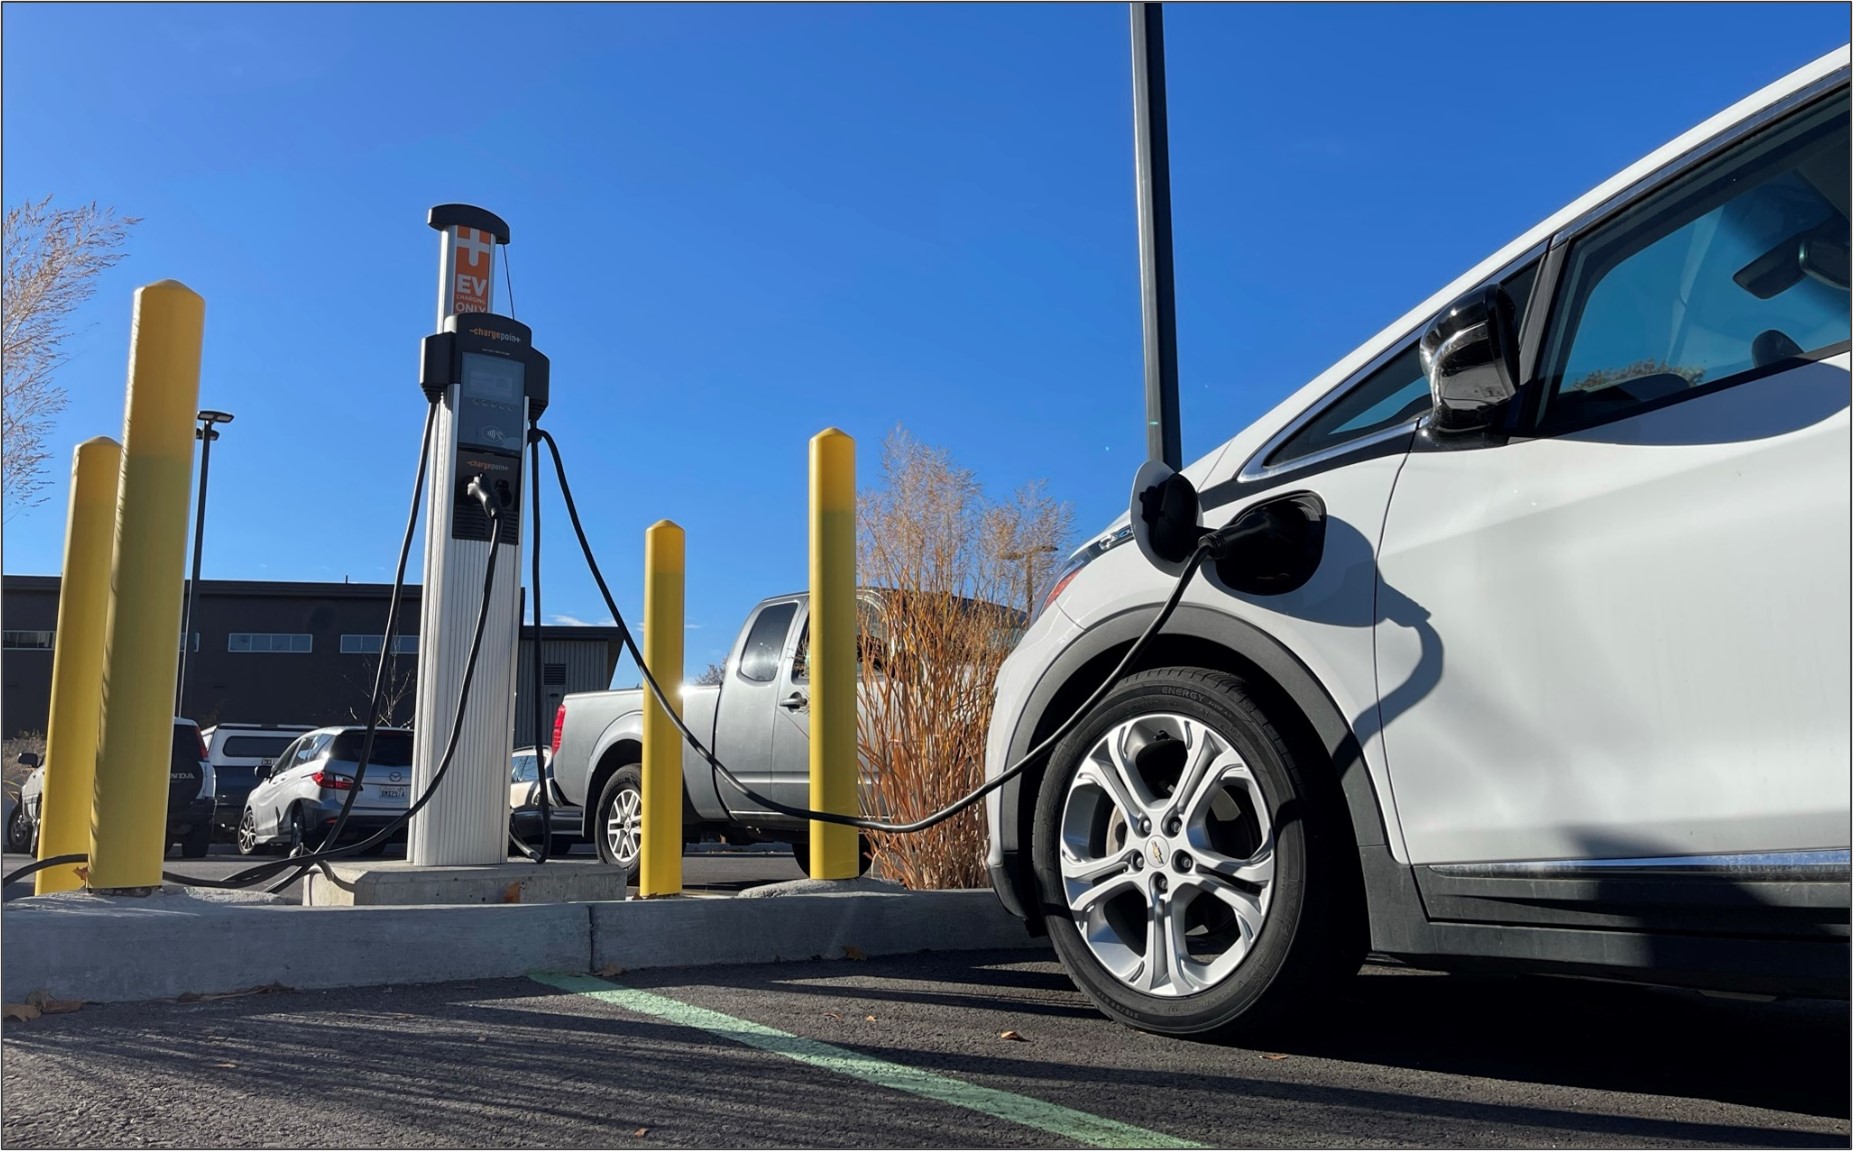 An electric vehicle charging in an Eastern Washington parking lot.